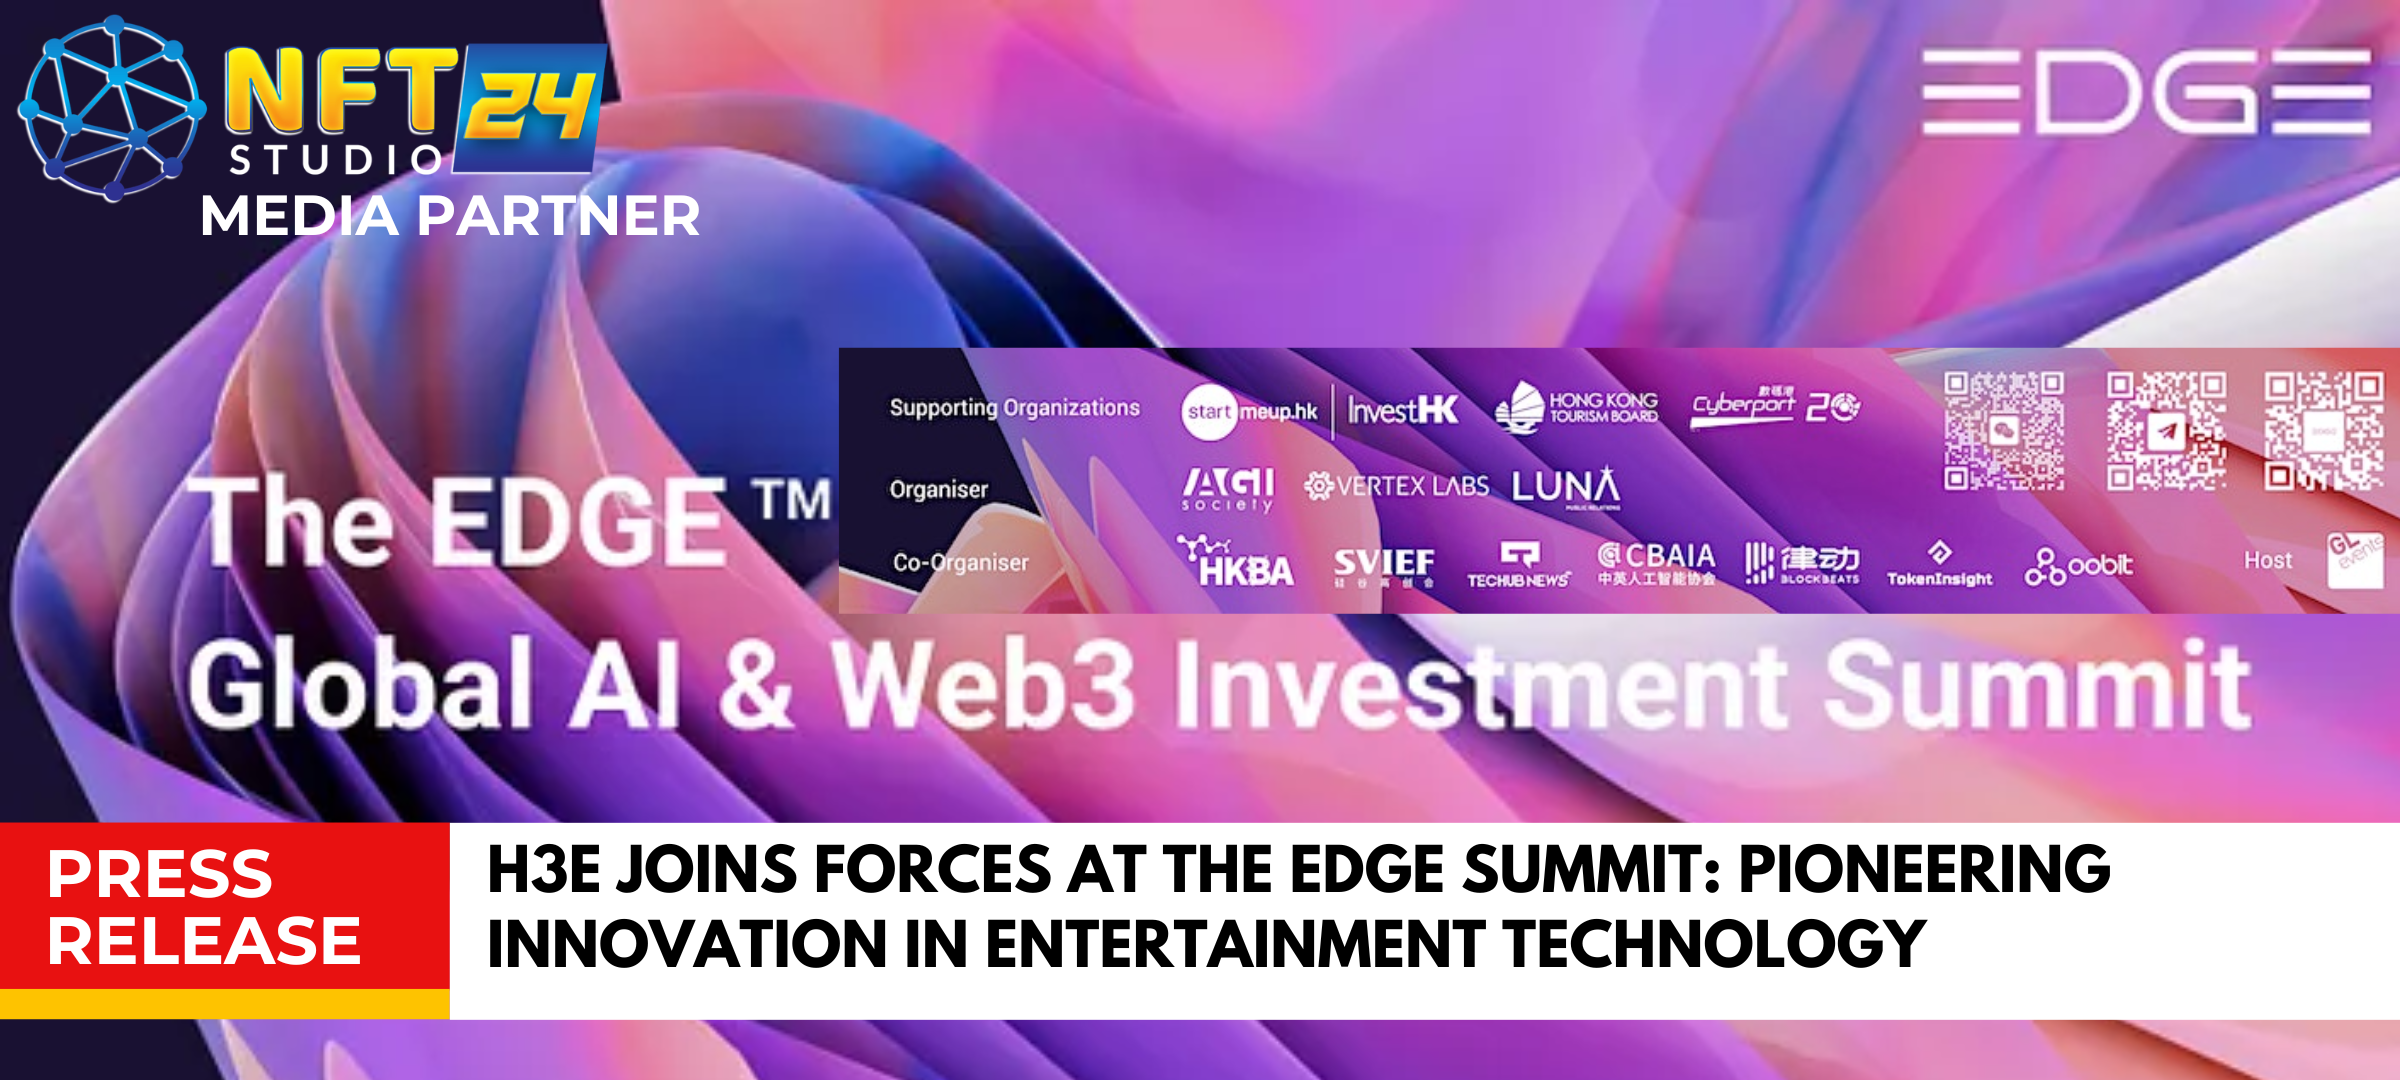 H3E Joins Forces at The EDGE Summit